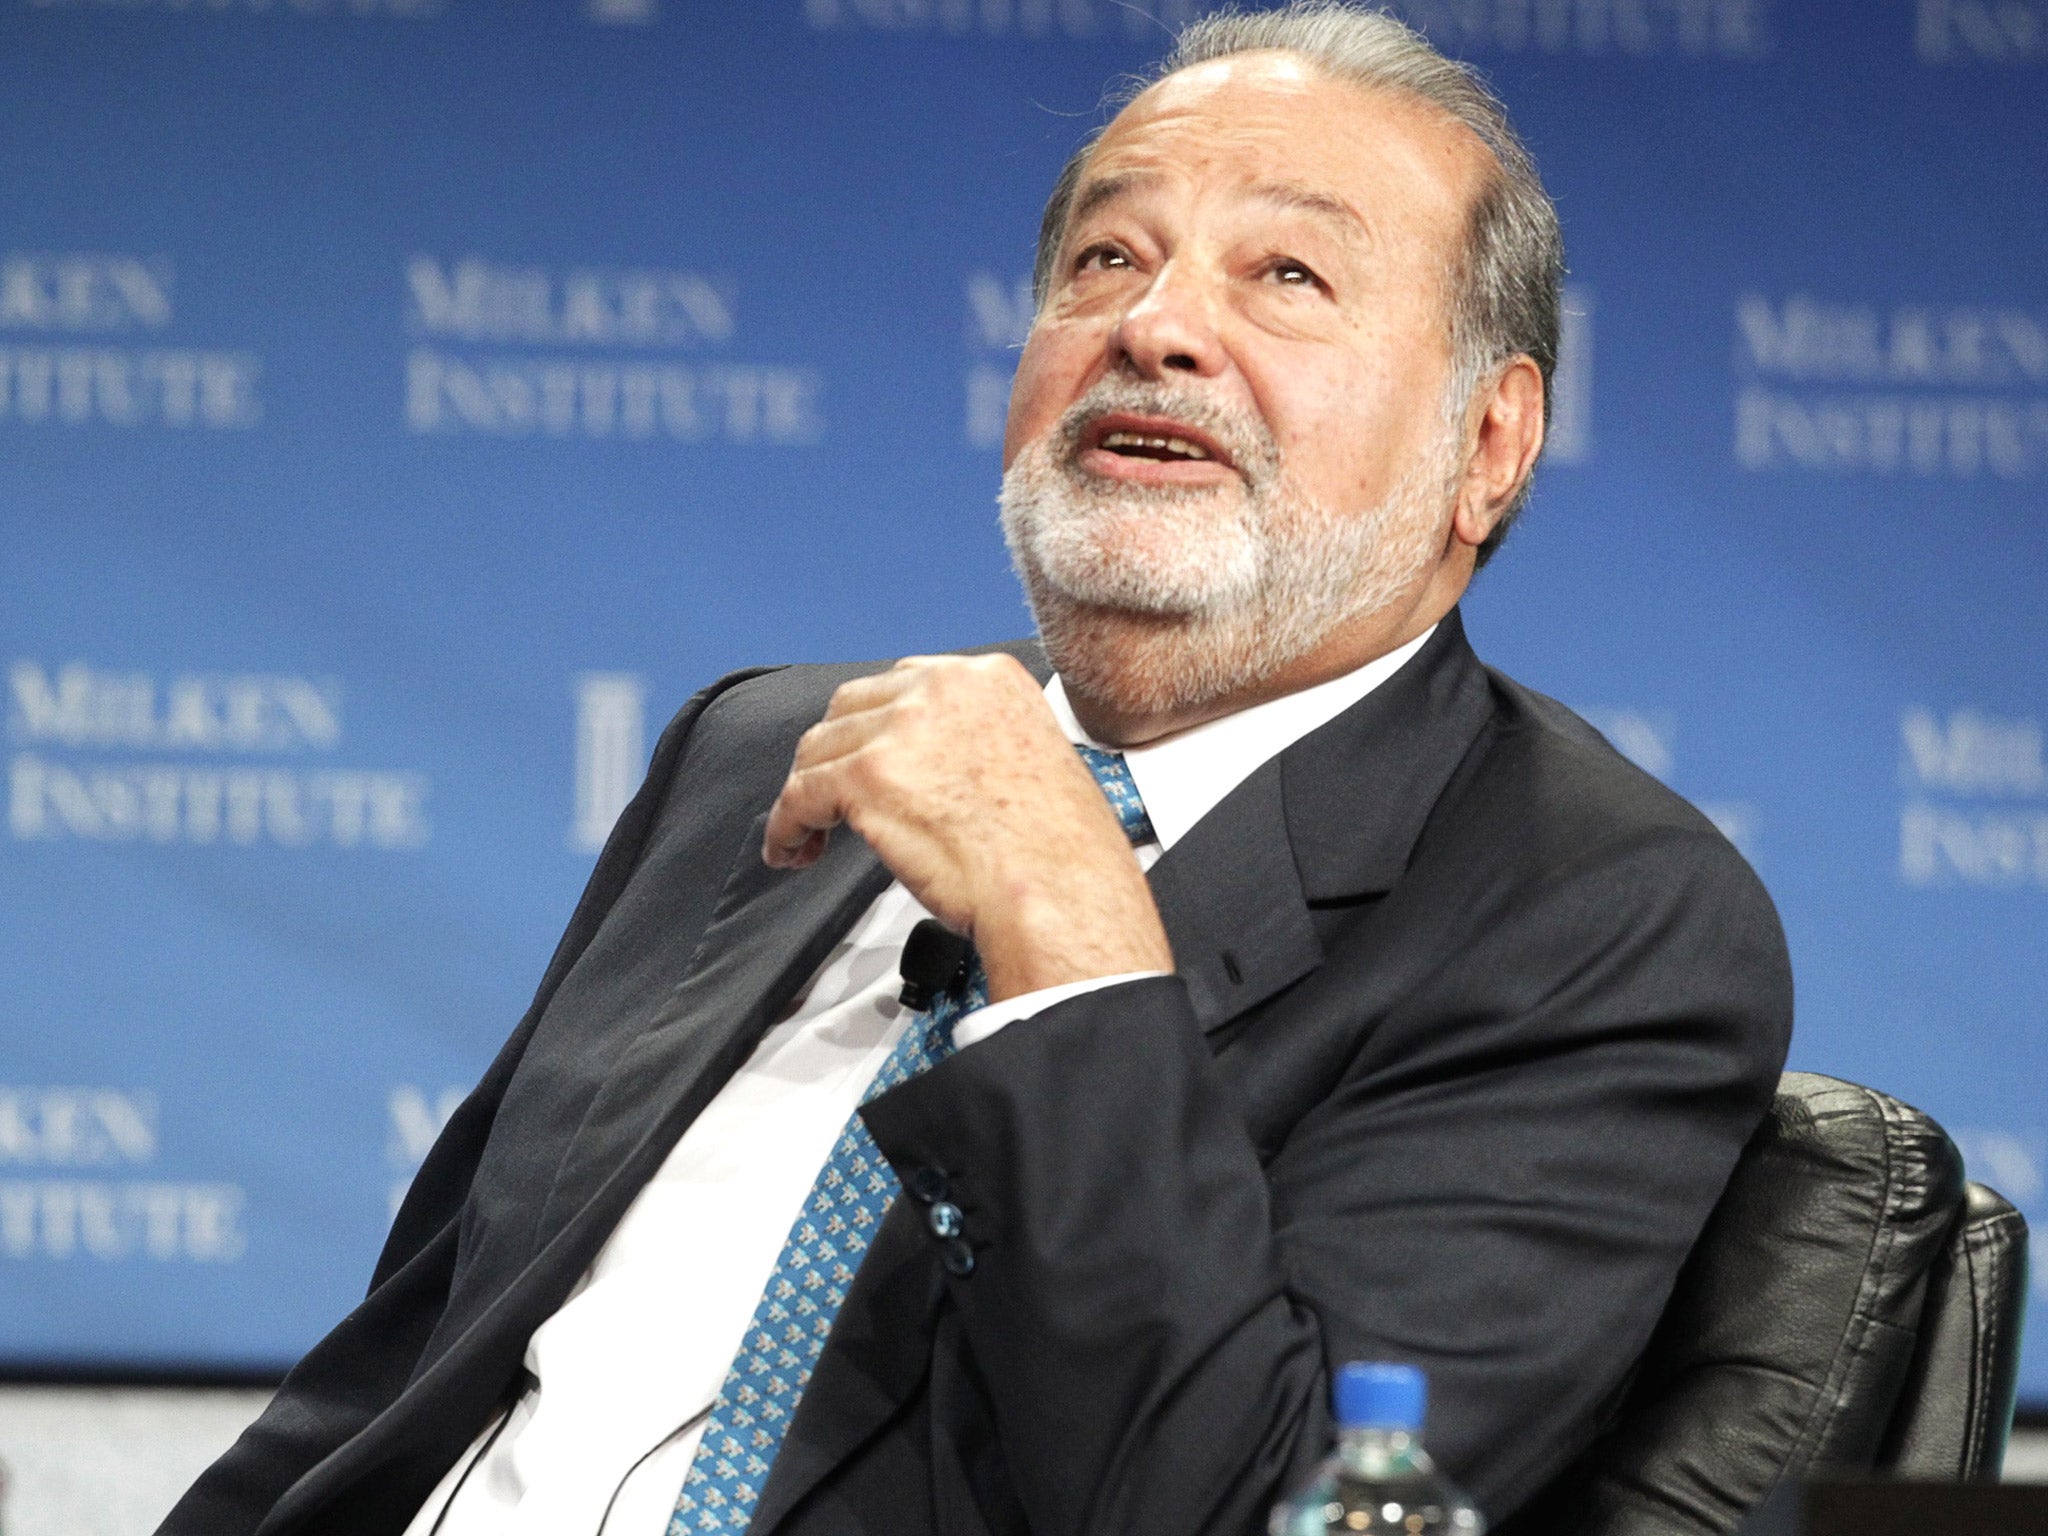 Carlos Slim has built a telecoms and retail empire that spans the US and most of Latin America